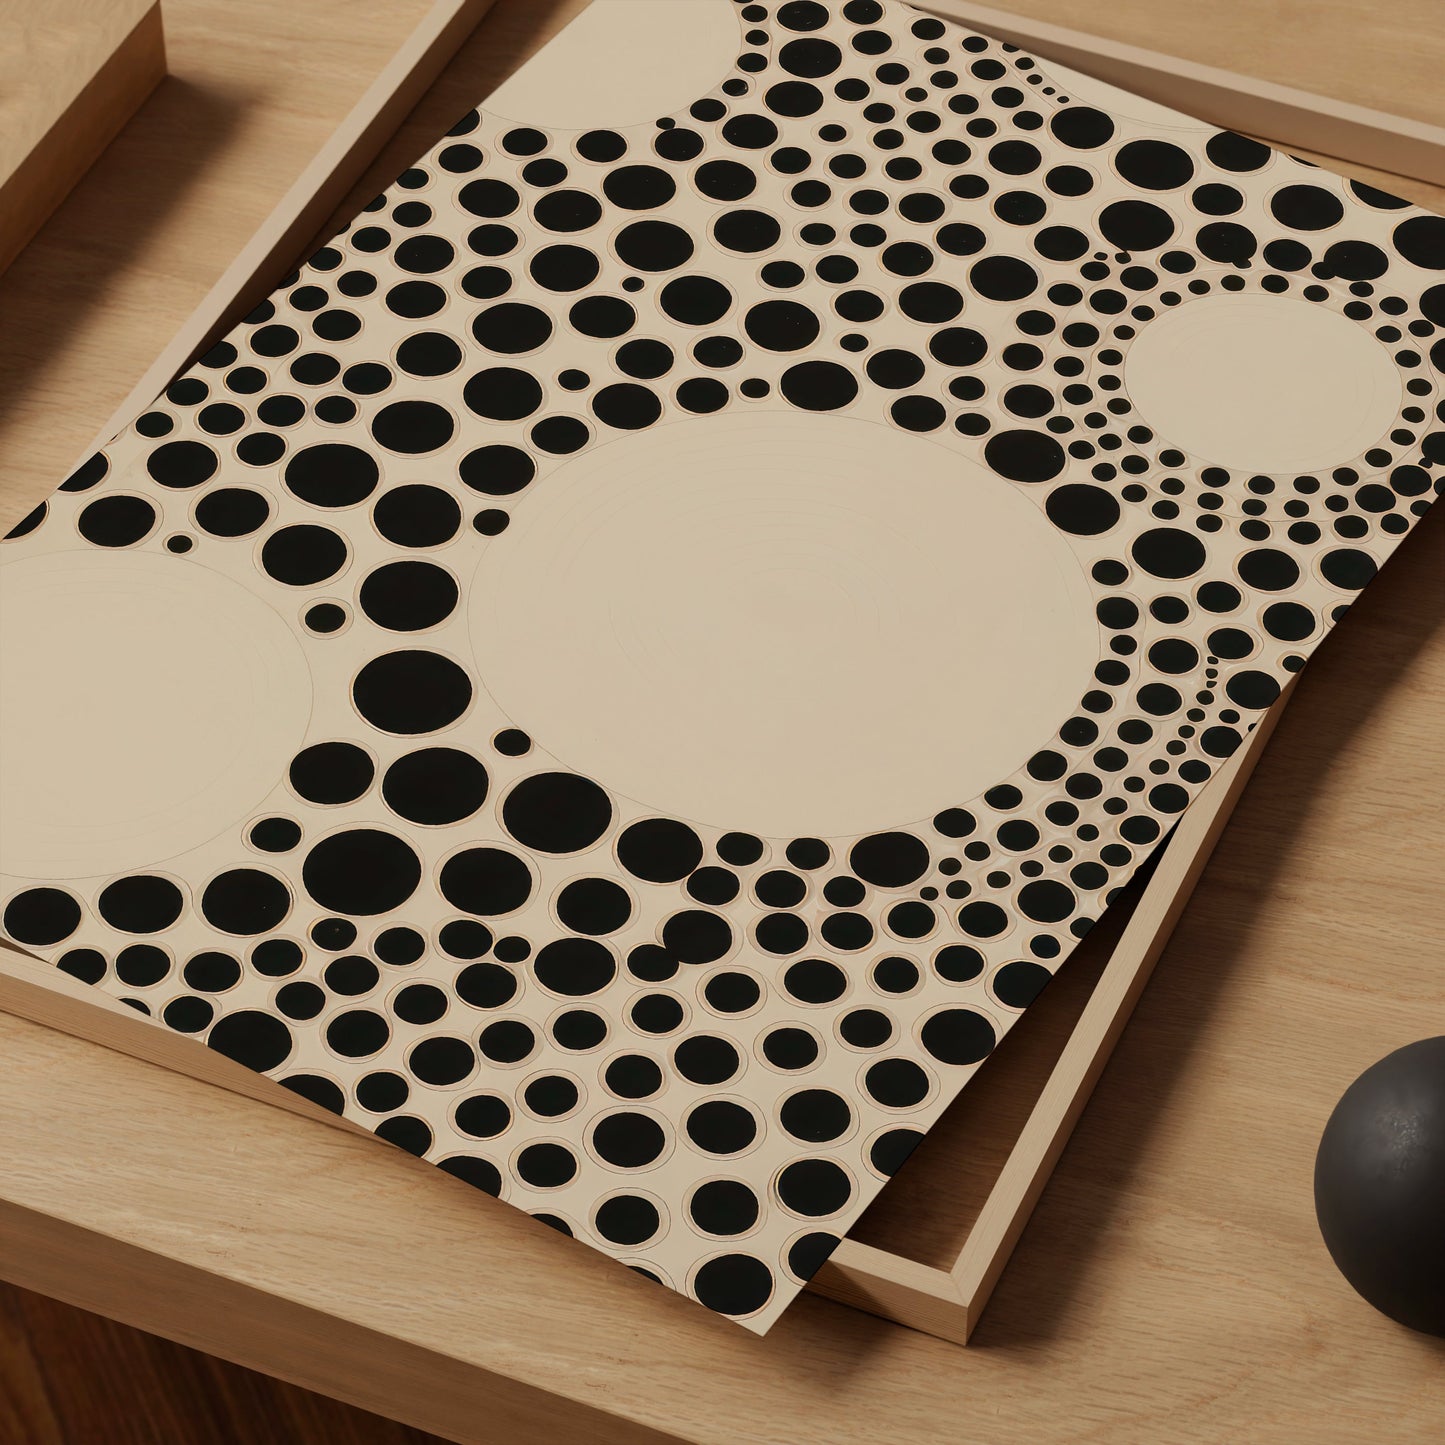 a wooden table topped with a black and white polka dot design